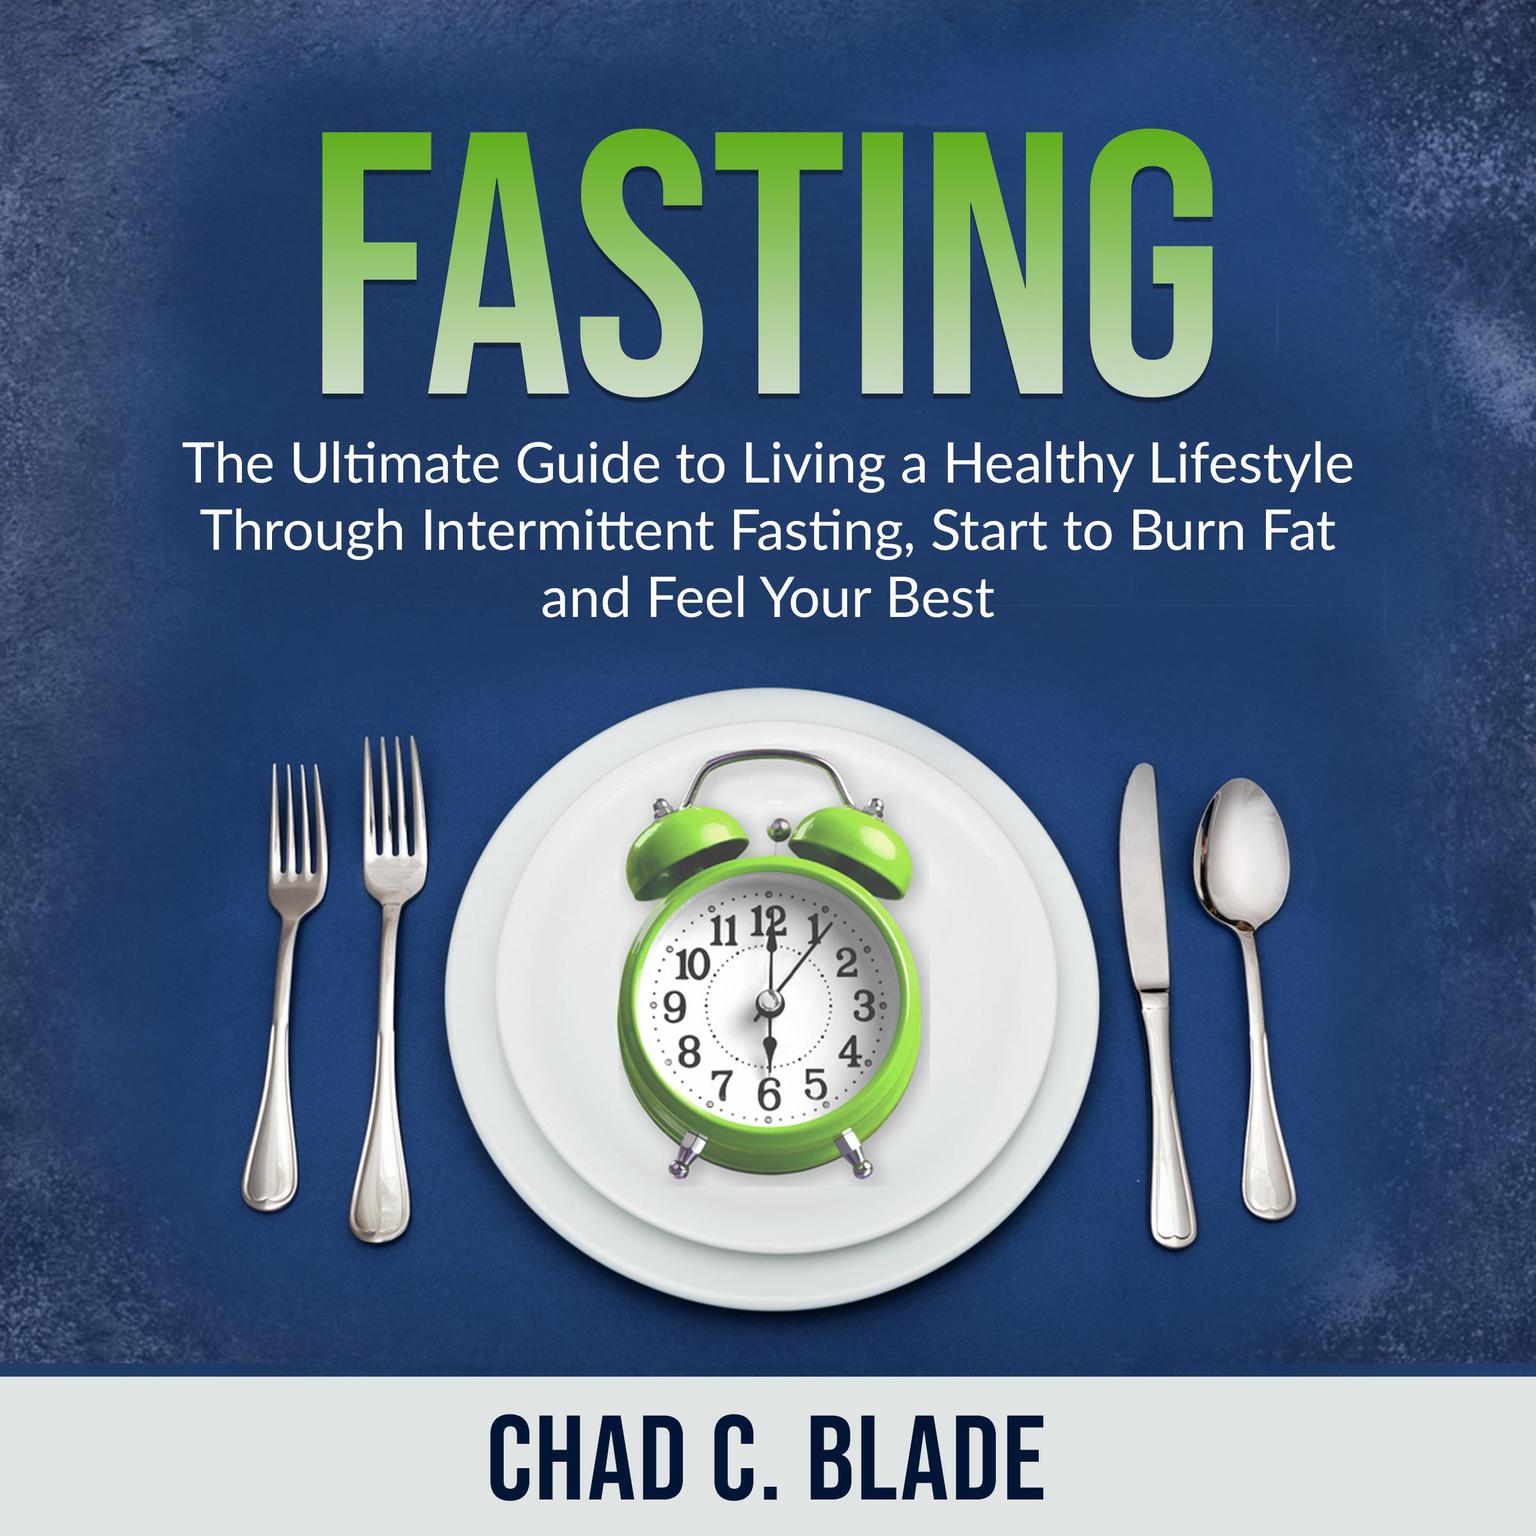 Fasting: The Ultimate Guide to Living a Healthy Lifestyle Through Intermittent Fasting, Start to Burn Fat and Feel Your Best Audiobook, by Chad C. Blade